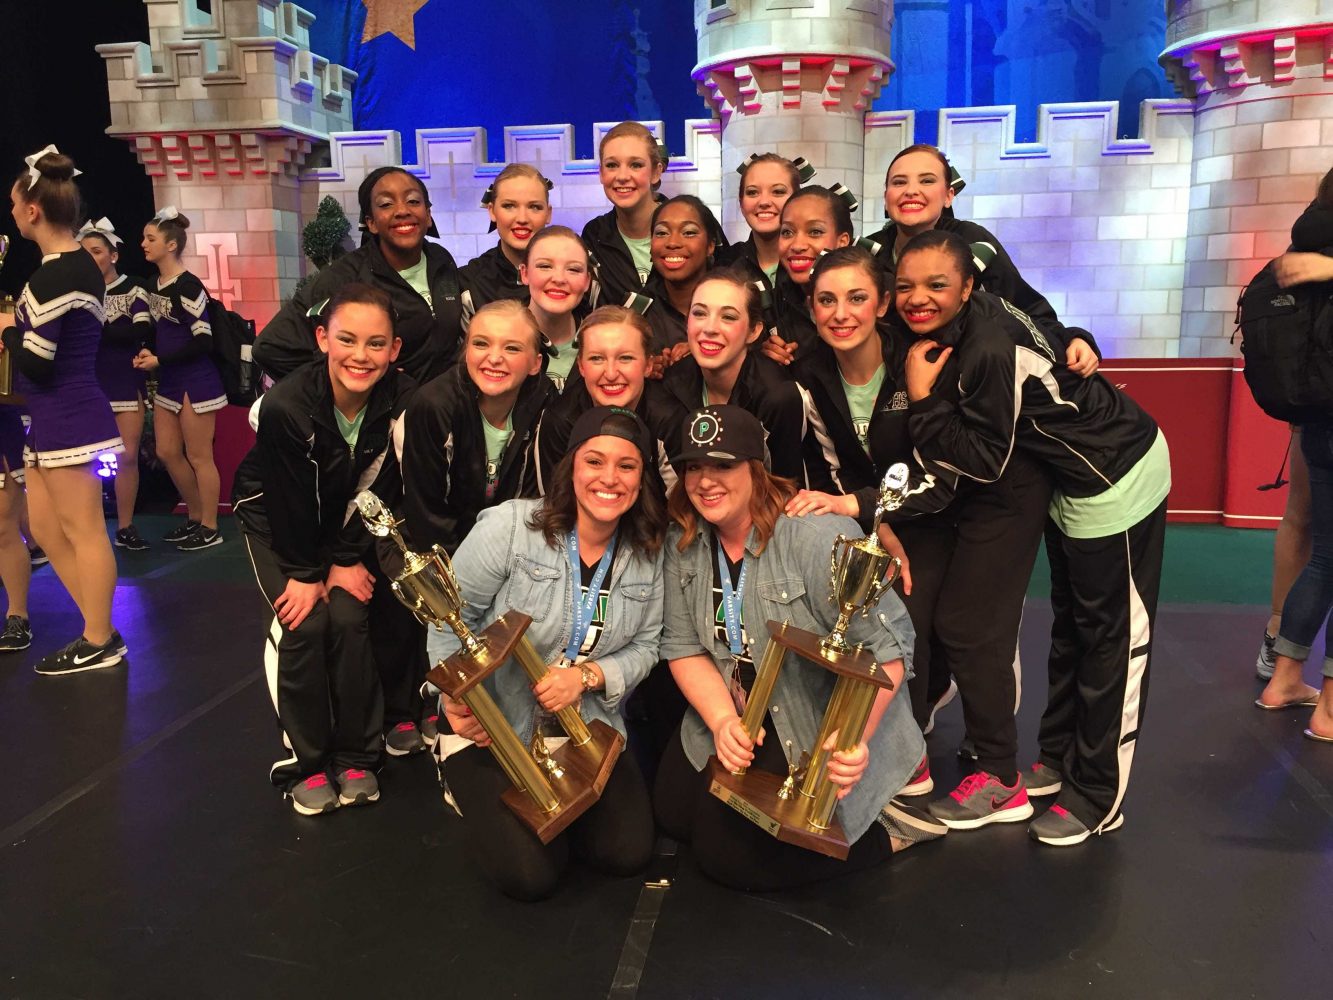 The Varsity Drill Team poses with their trophies for finishing in 8th place and 16th place in hip hop and pom, respectively, at Nationals on Sunday, Jan. 31. (Submitted photo) 